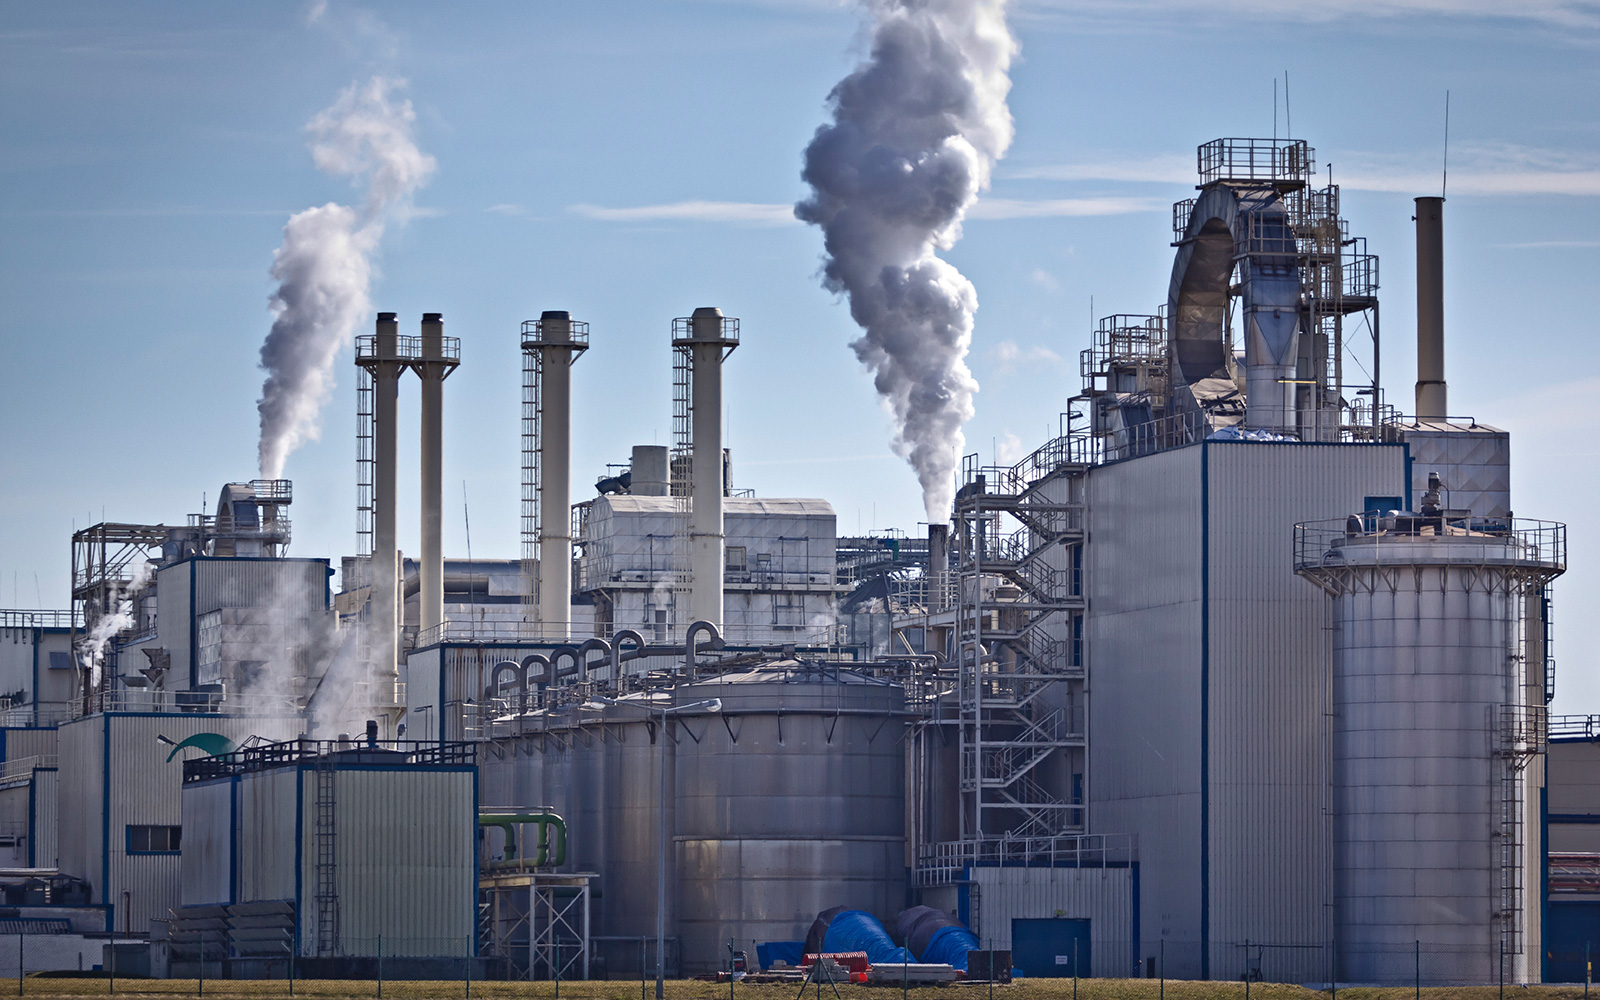 Chemical plant with vapor or smoke plumes rising into the clear blue sky